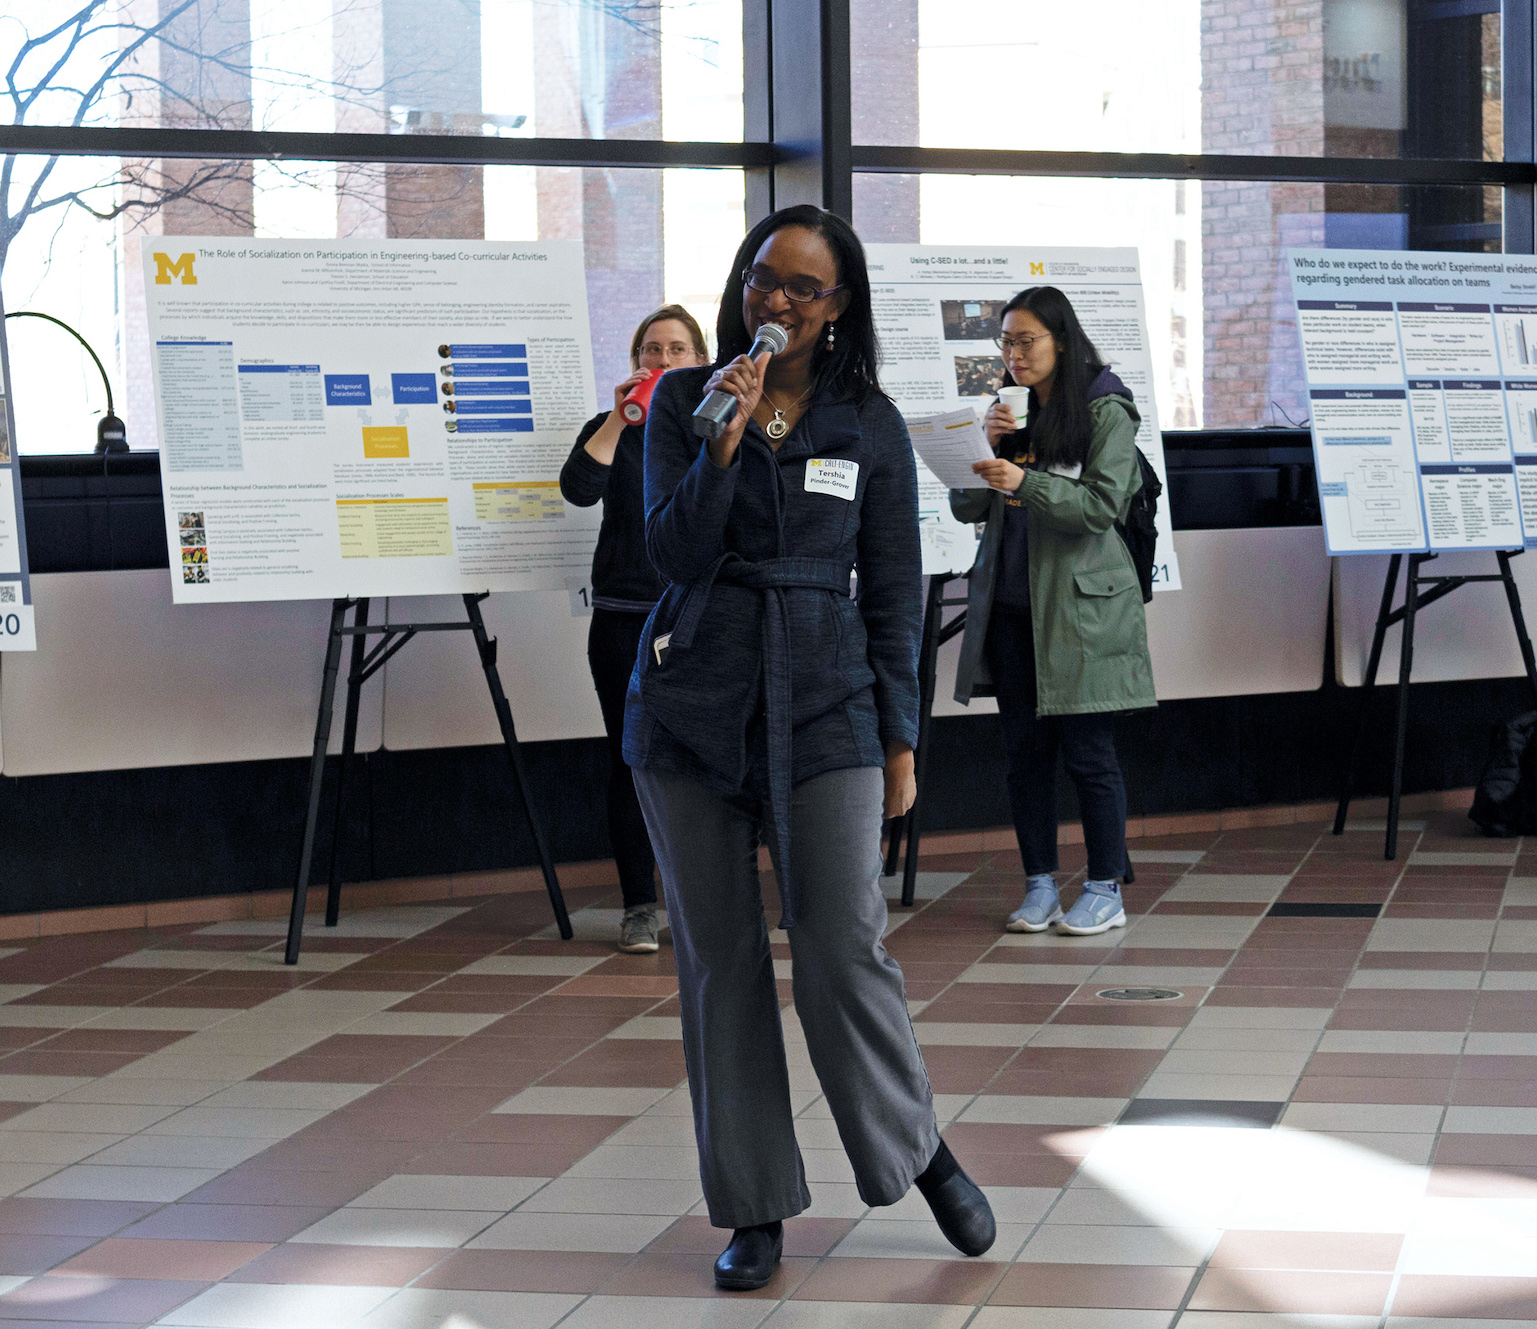 Tershia Pinder-Grover engaging faculty at a teaching innovation poster session she organized.